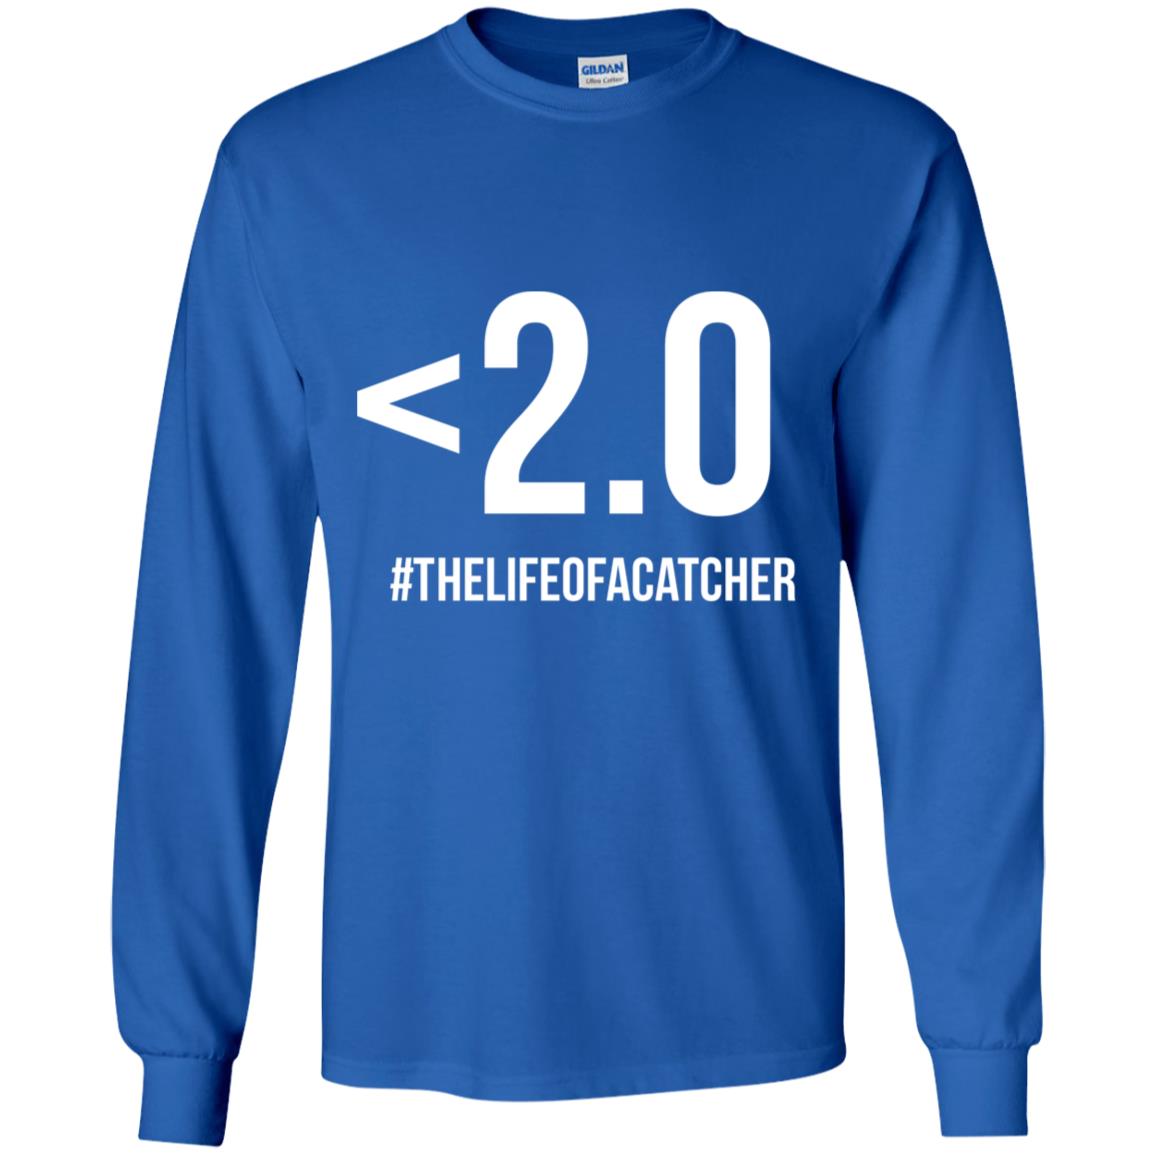 The Catching Guy Drop Your Pop < 2.0 Youth Long Sleeve Tee blue